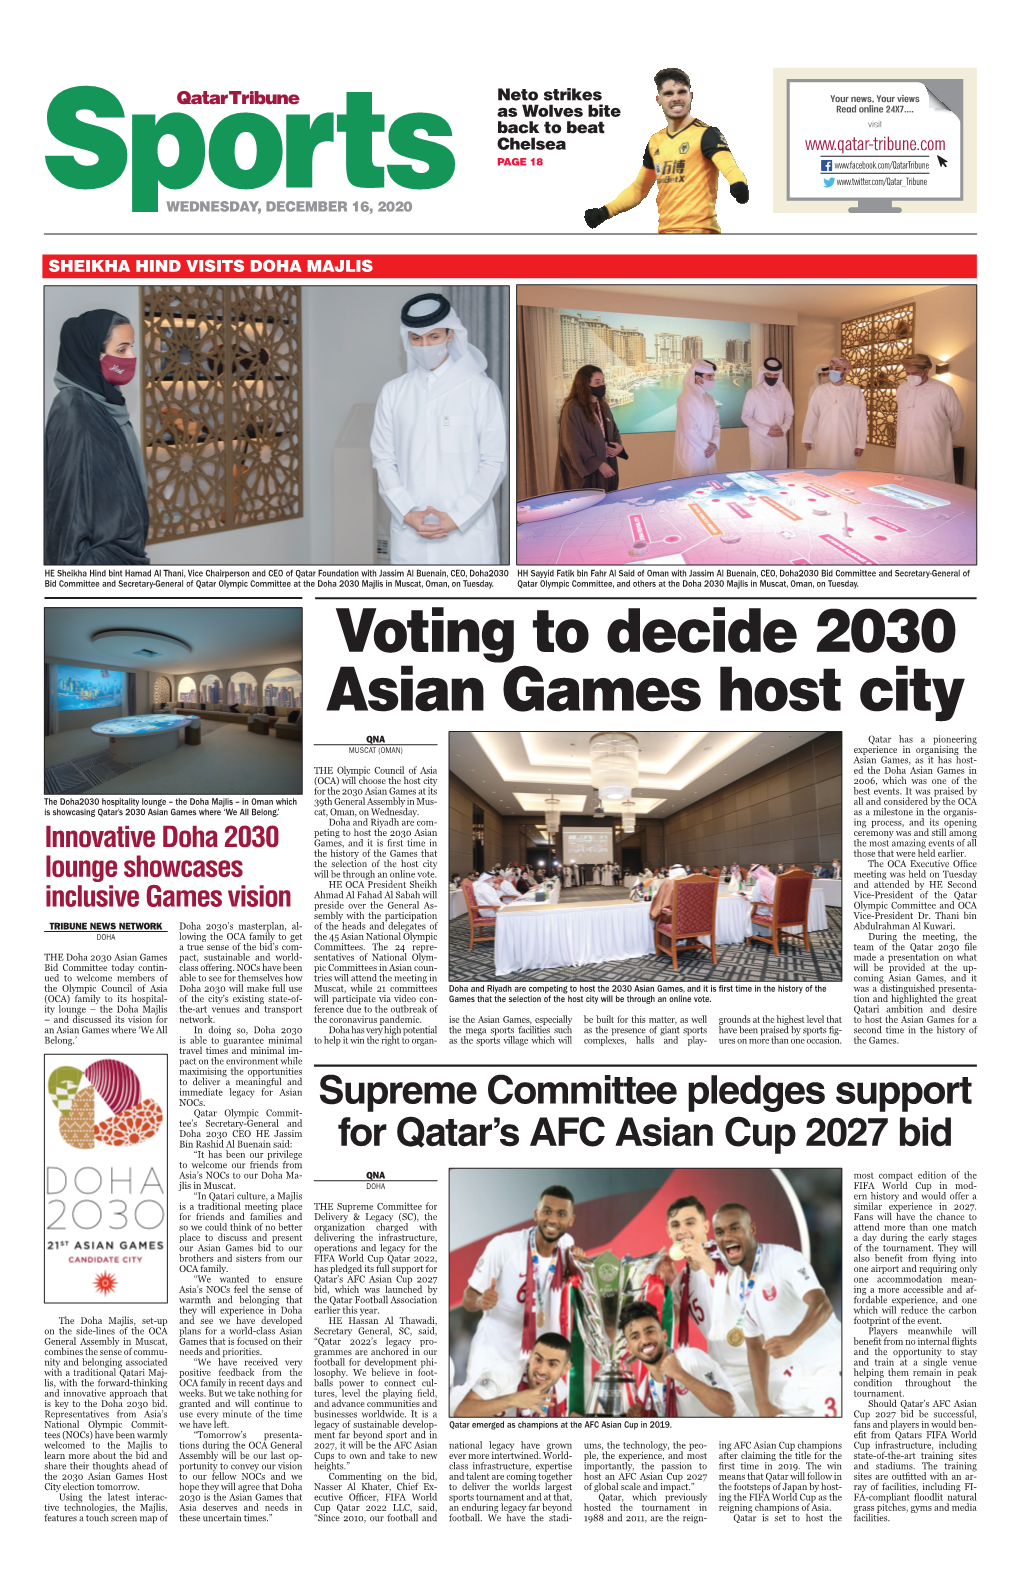 Voting to Decide 2030 Asian Games Host City